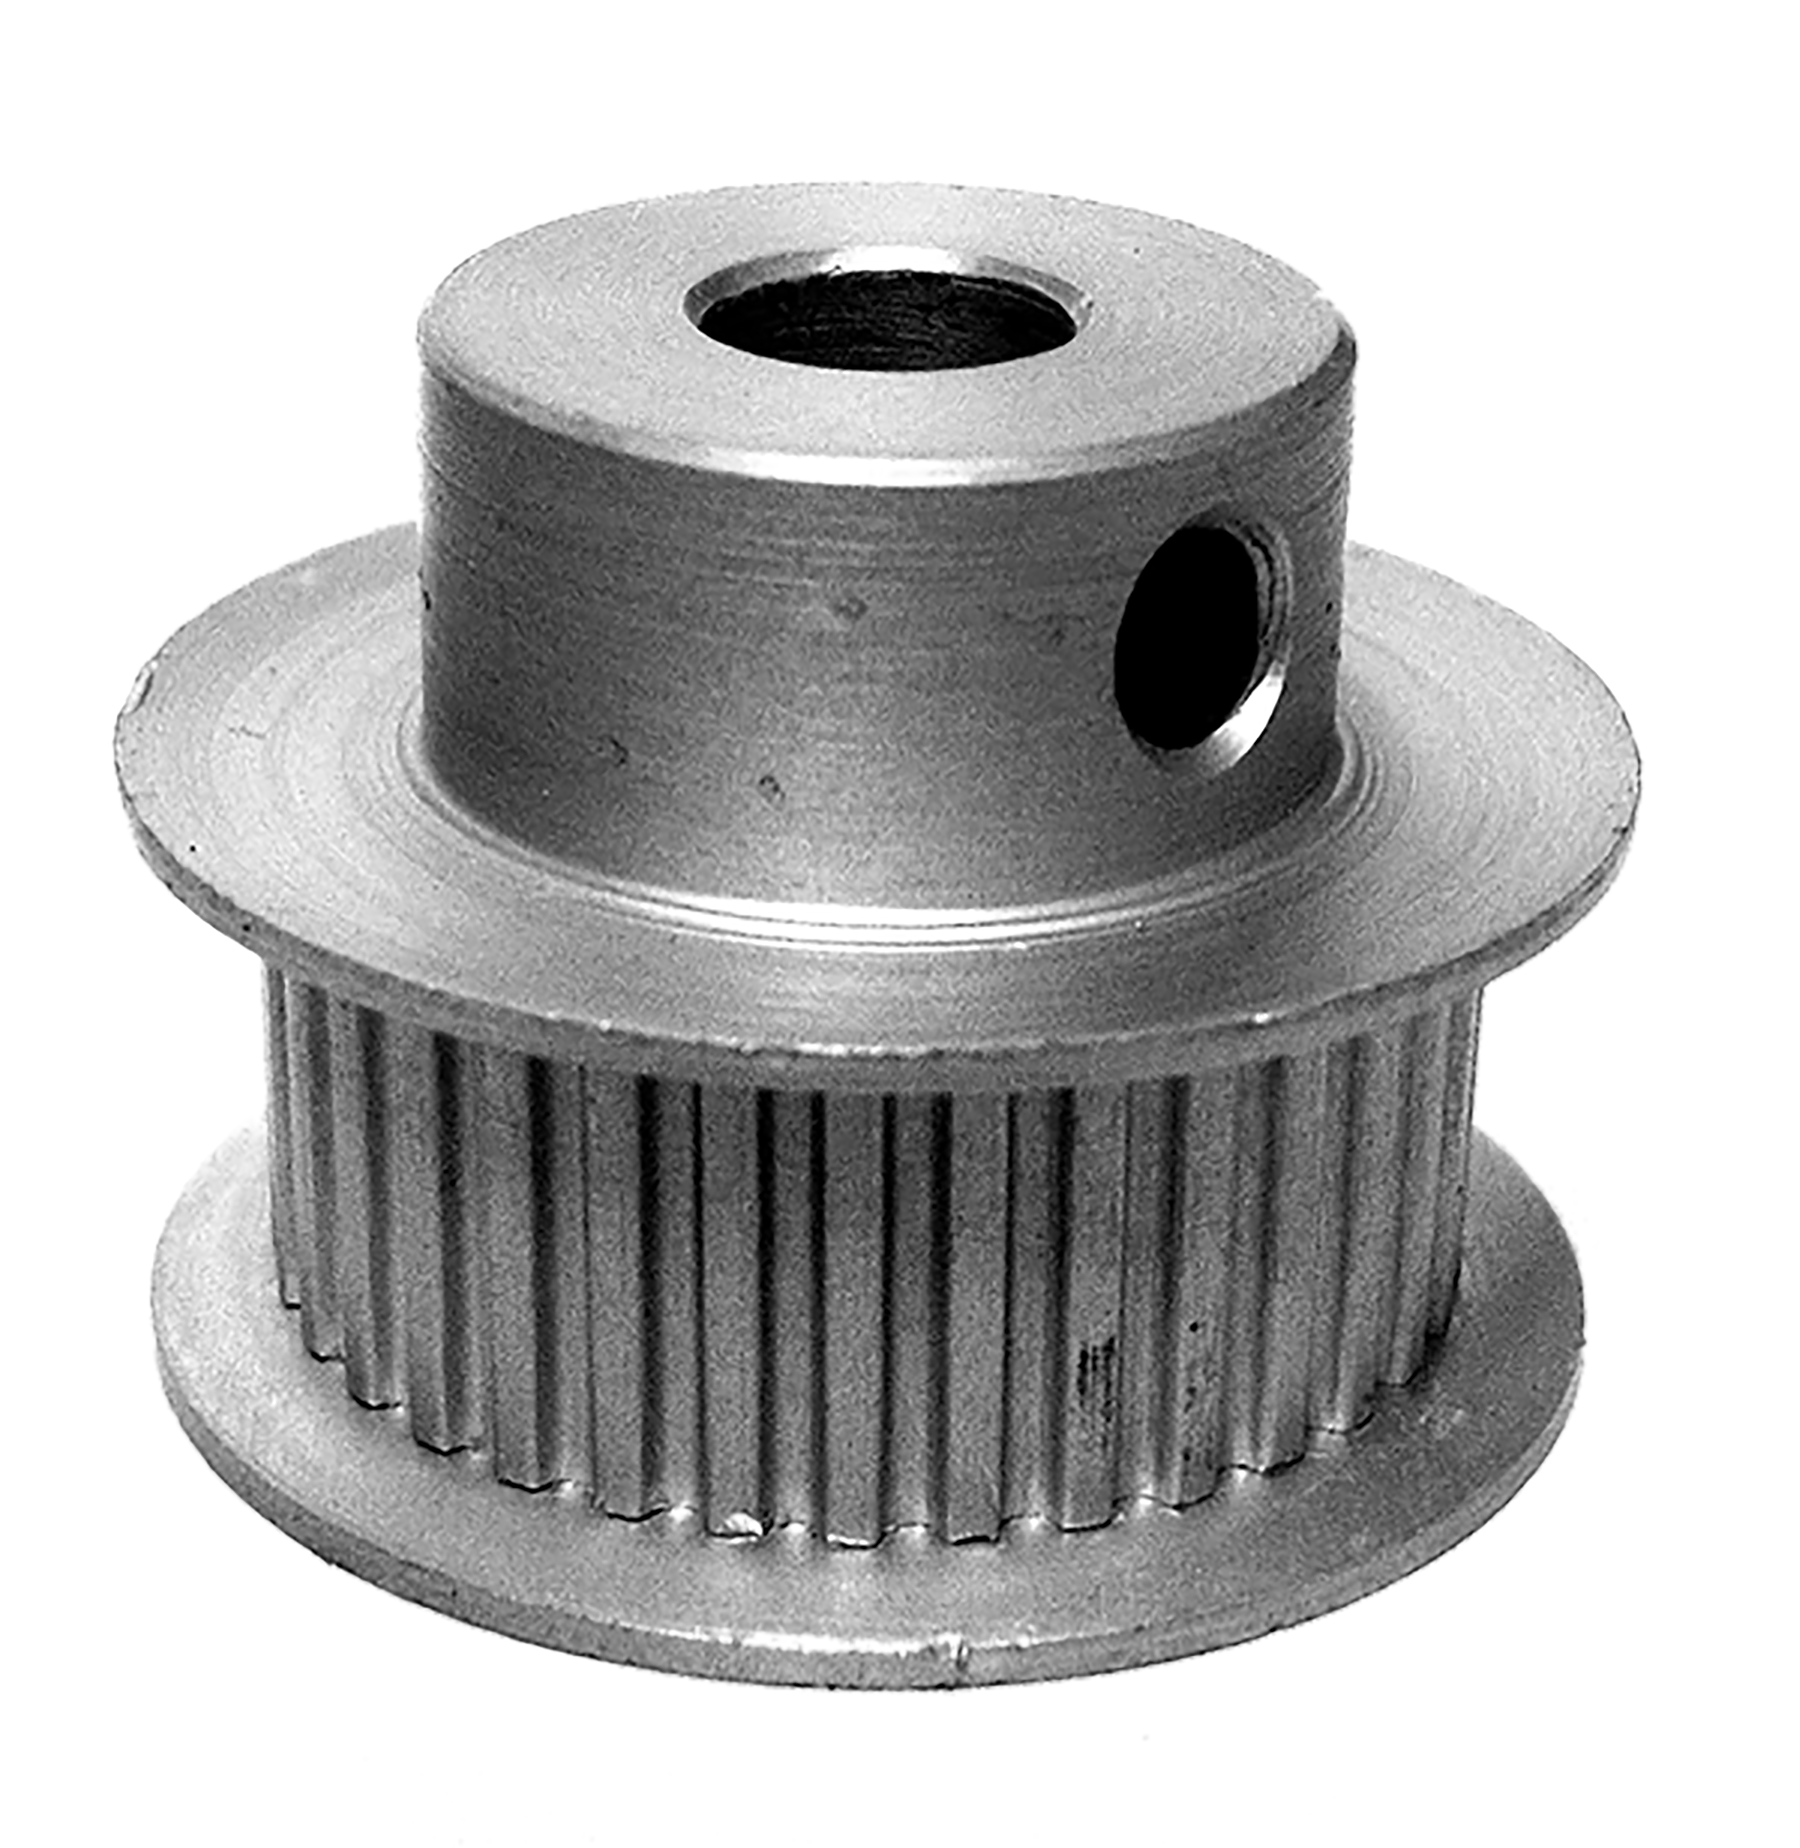 22LT312-6FA2 - Aluminum Imperial Pitch Pulleys